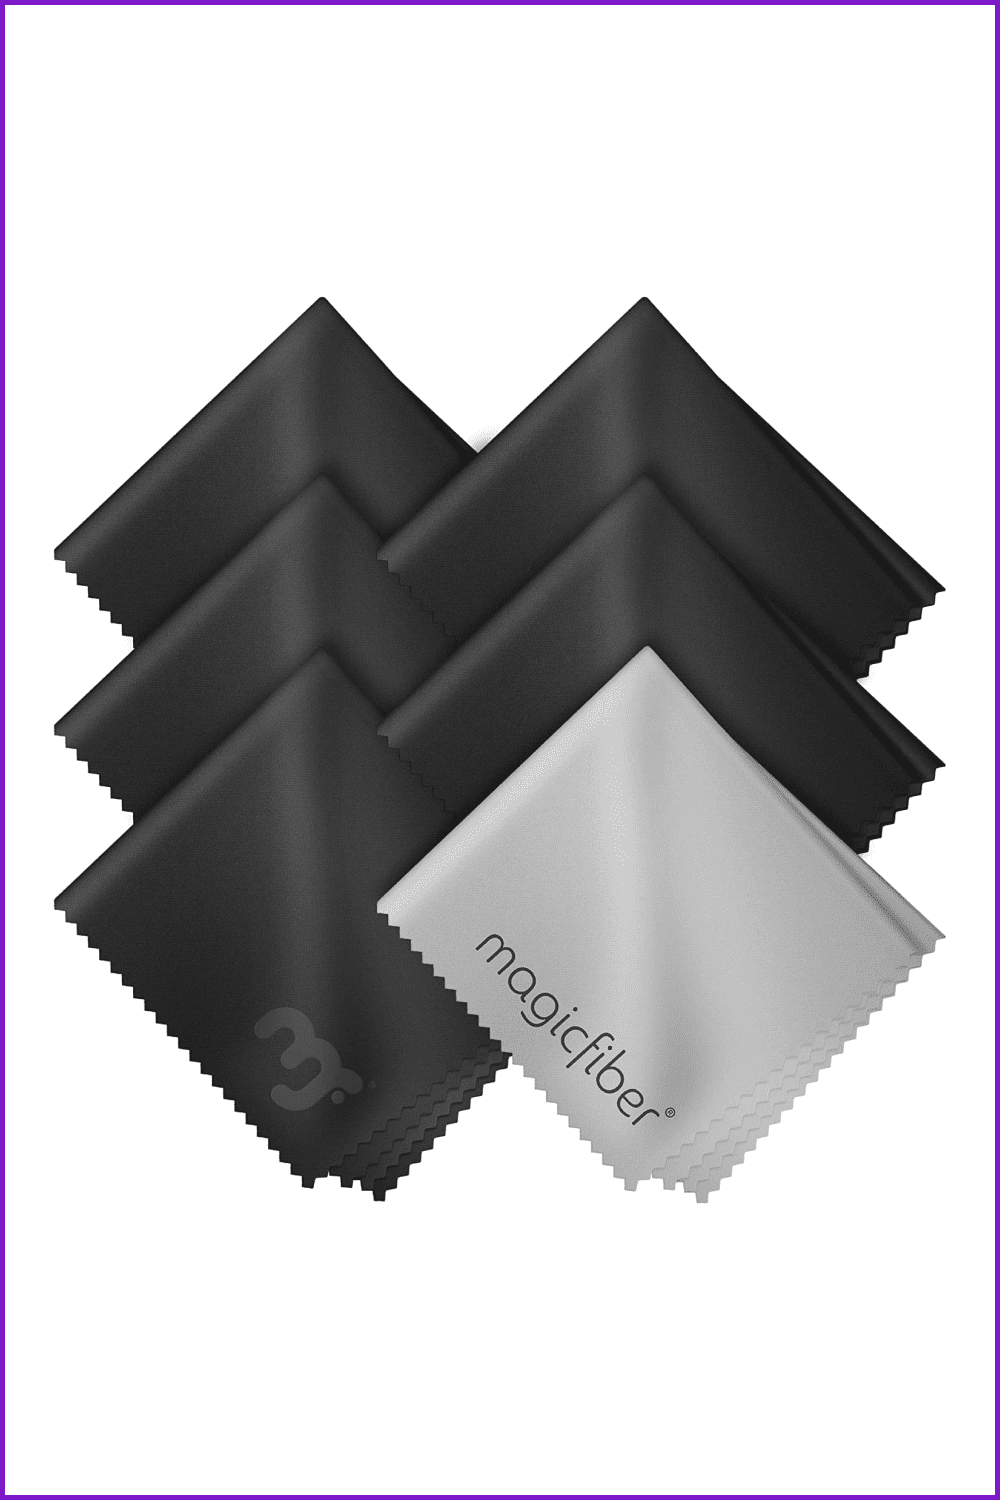 Photos of black and white scarves from fiber.